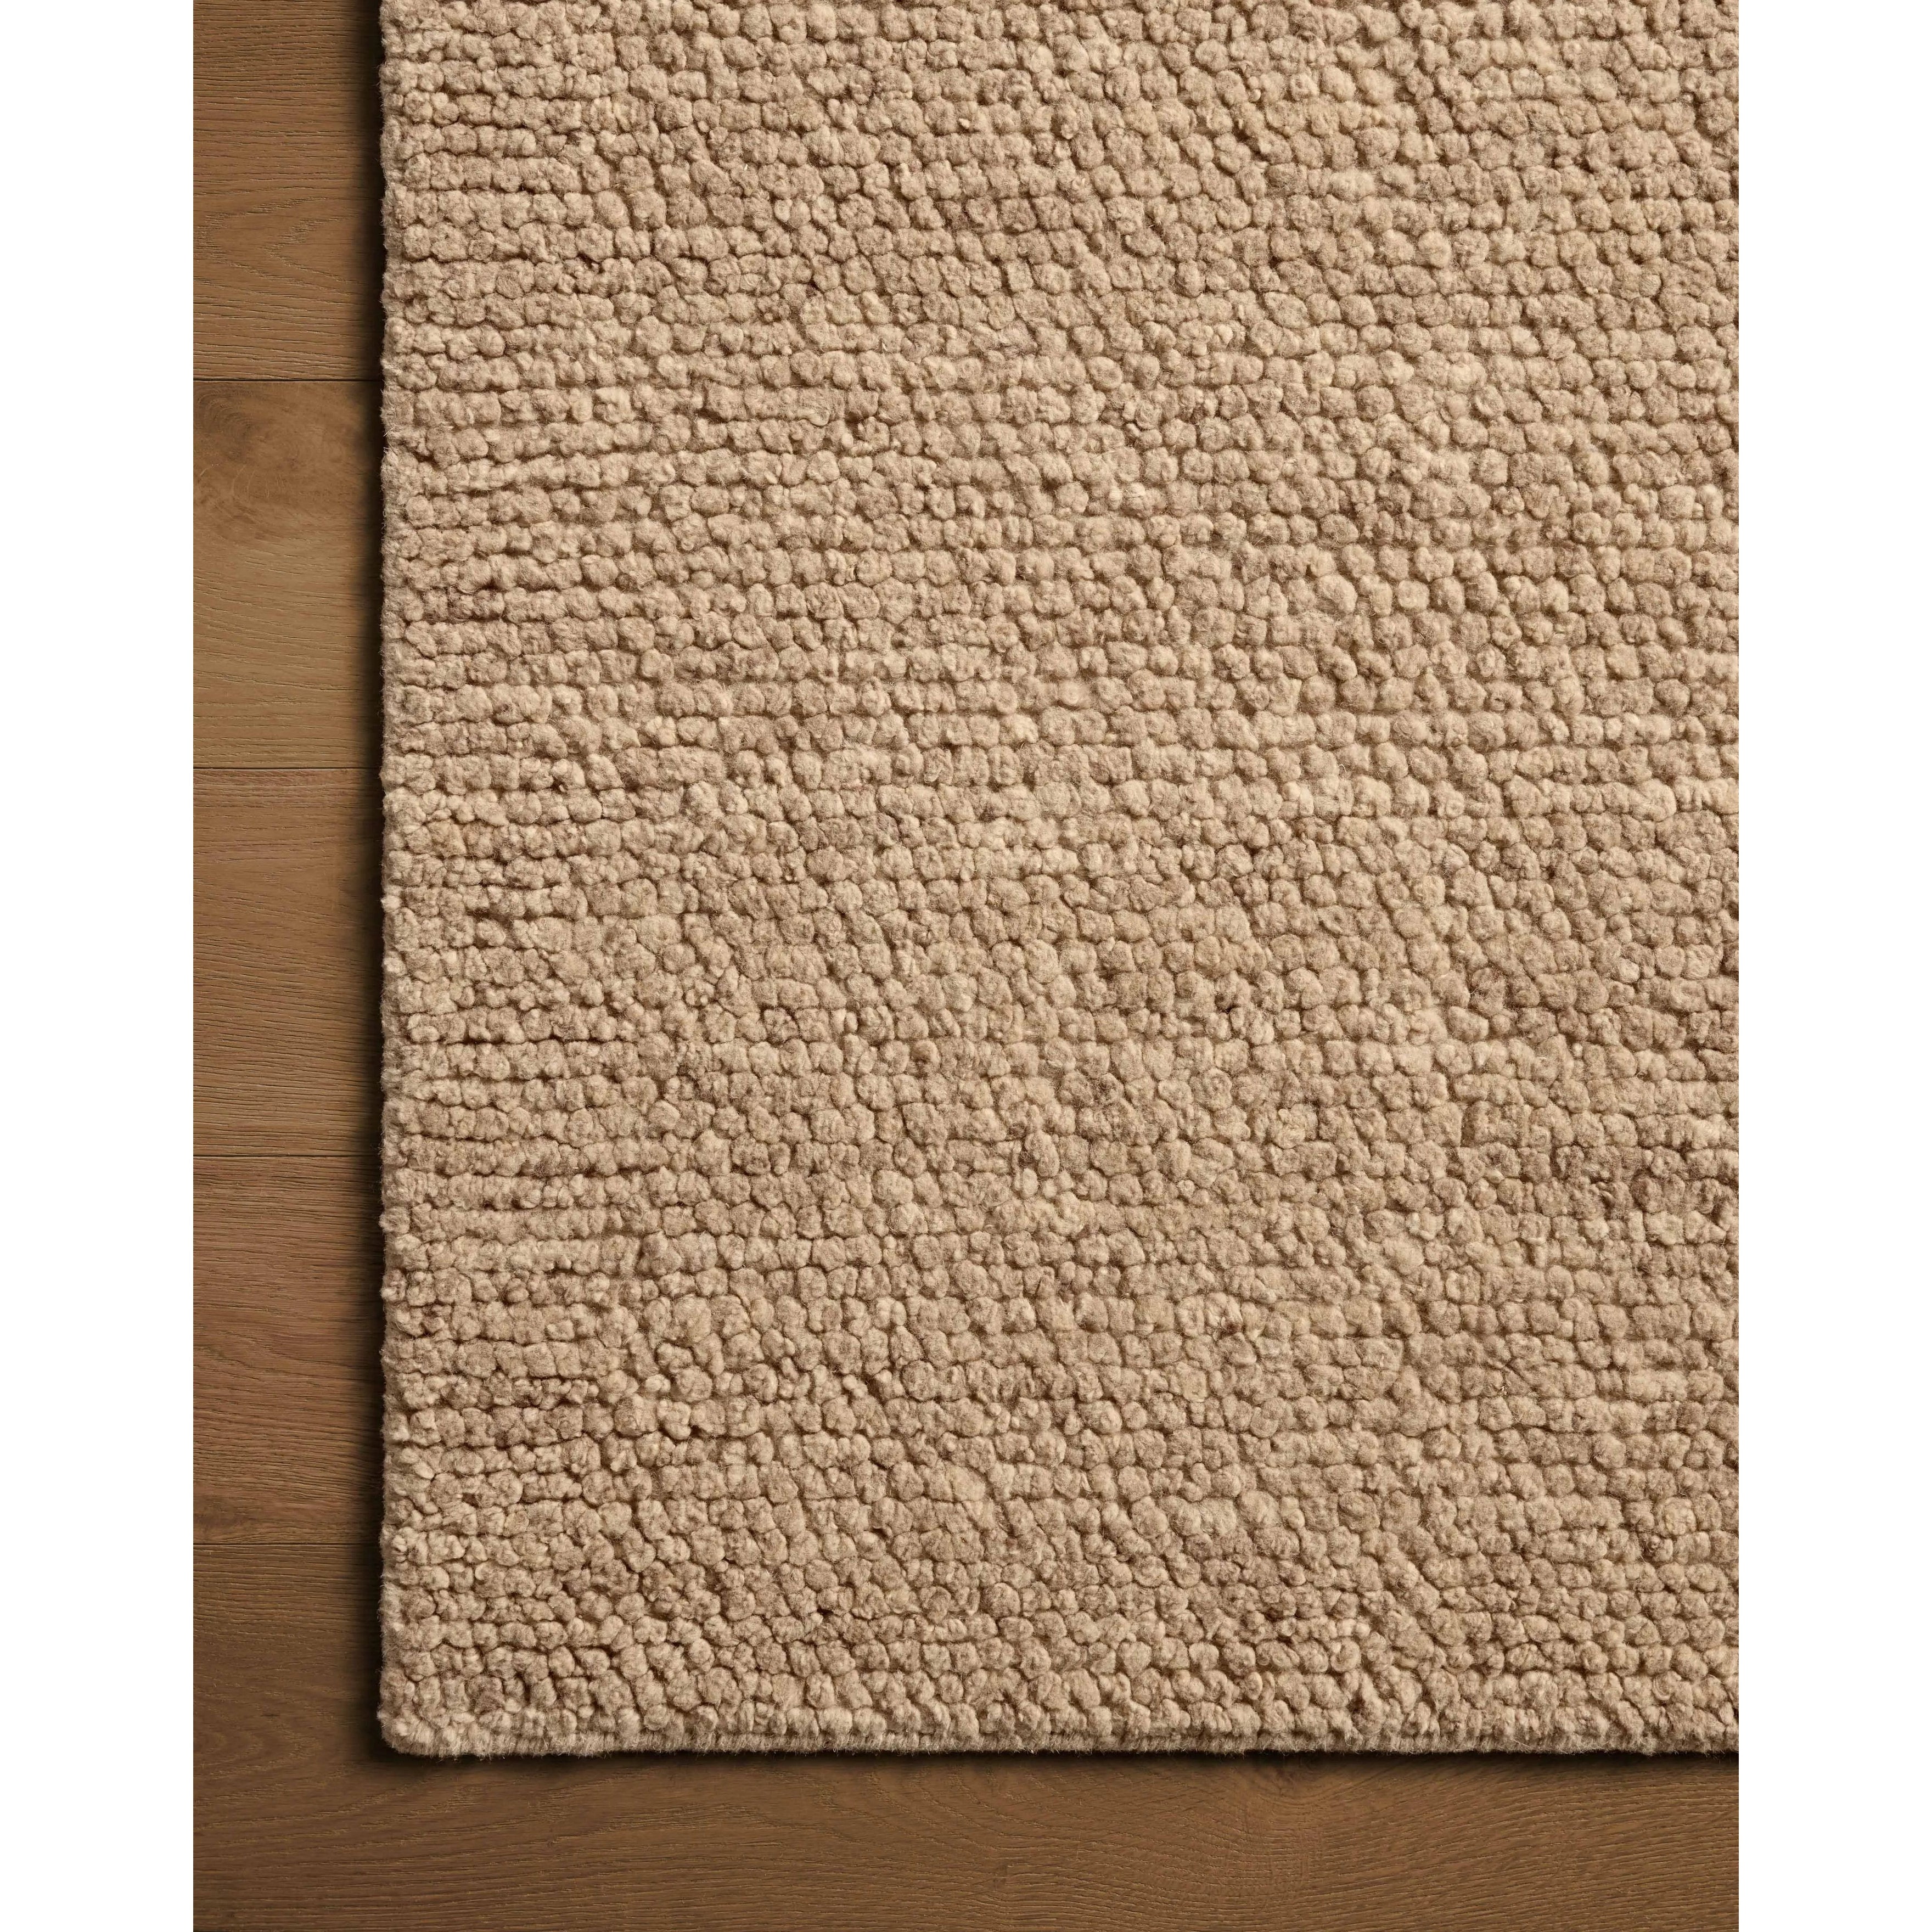 With versatile earth tones and a chunky, hand-knotted texture resembling tiny pebbles, the Frida Sand Rug by Brigette Romanek x Loloi can ground any room with a sense of elevated ease. Each area rug features a subtle nuance in color variation due to the handmade nature of its construction and has a pleasantly nubby softness underfoot. Amethyst Home provides interior design, new home construction design consulting, vintage area rugs, and lighting in the San Diego metro area.